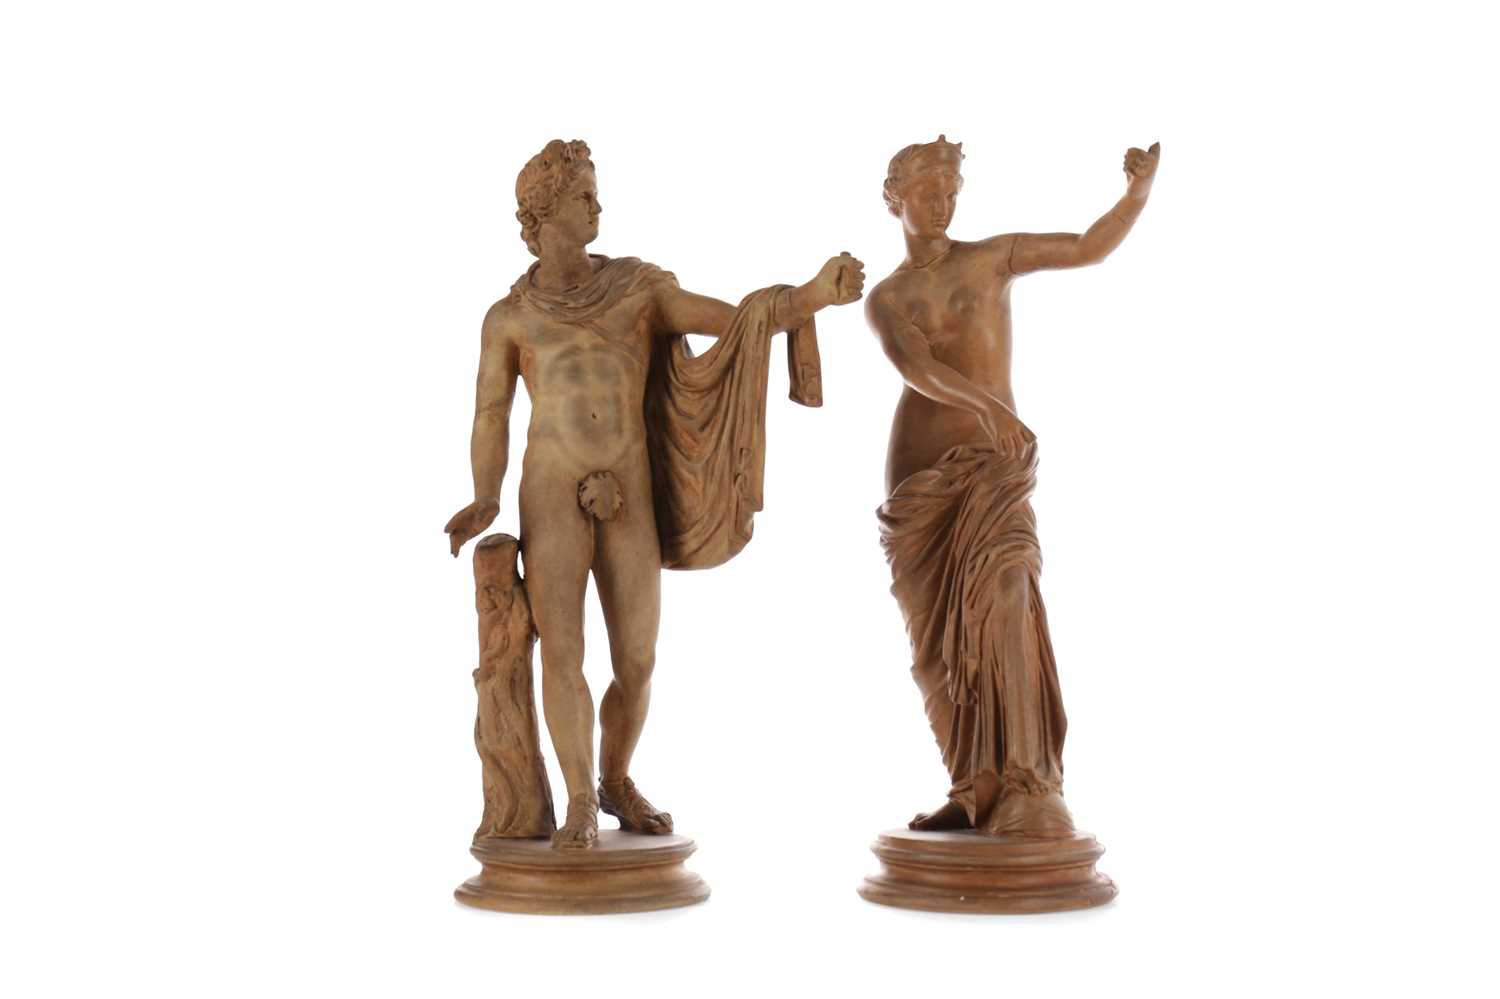 Lot 464 - A PAIR OF LATE VICTORIAN TERRACOTTA FIGURES AFTER THE ANTIQUE